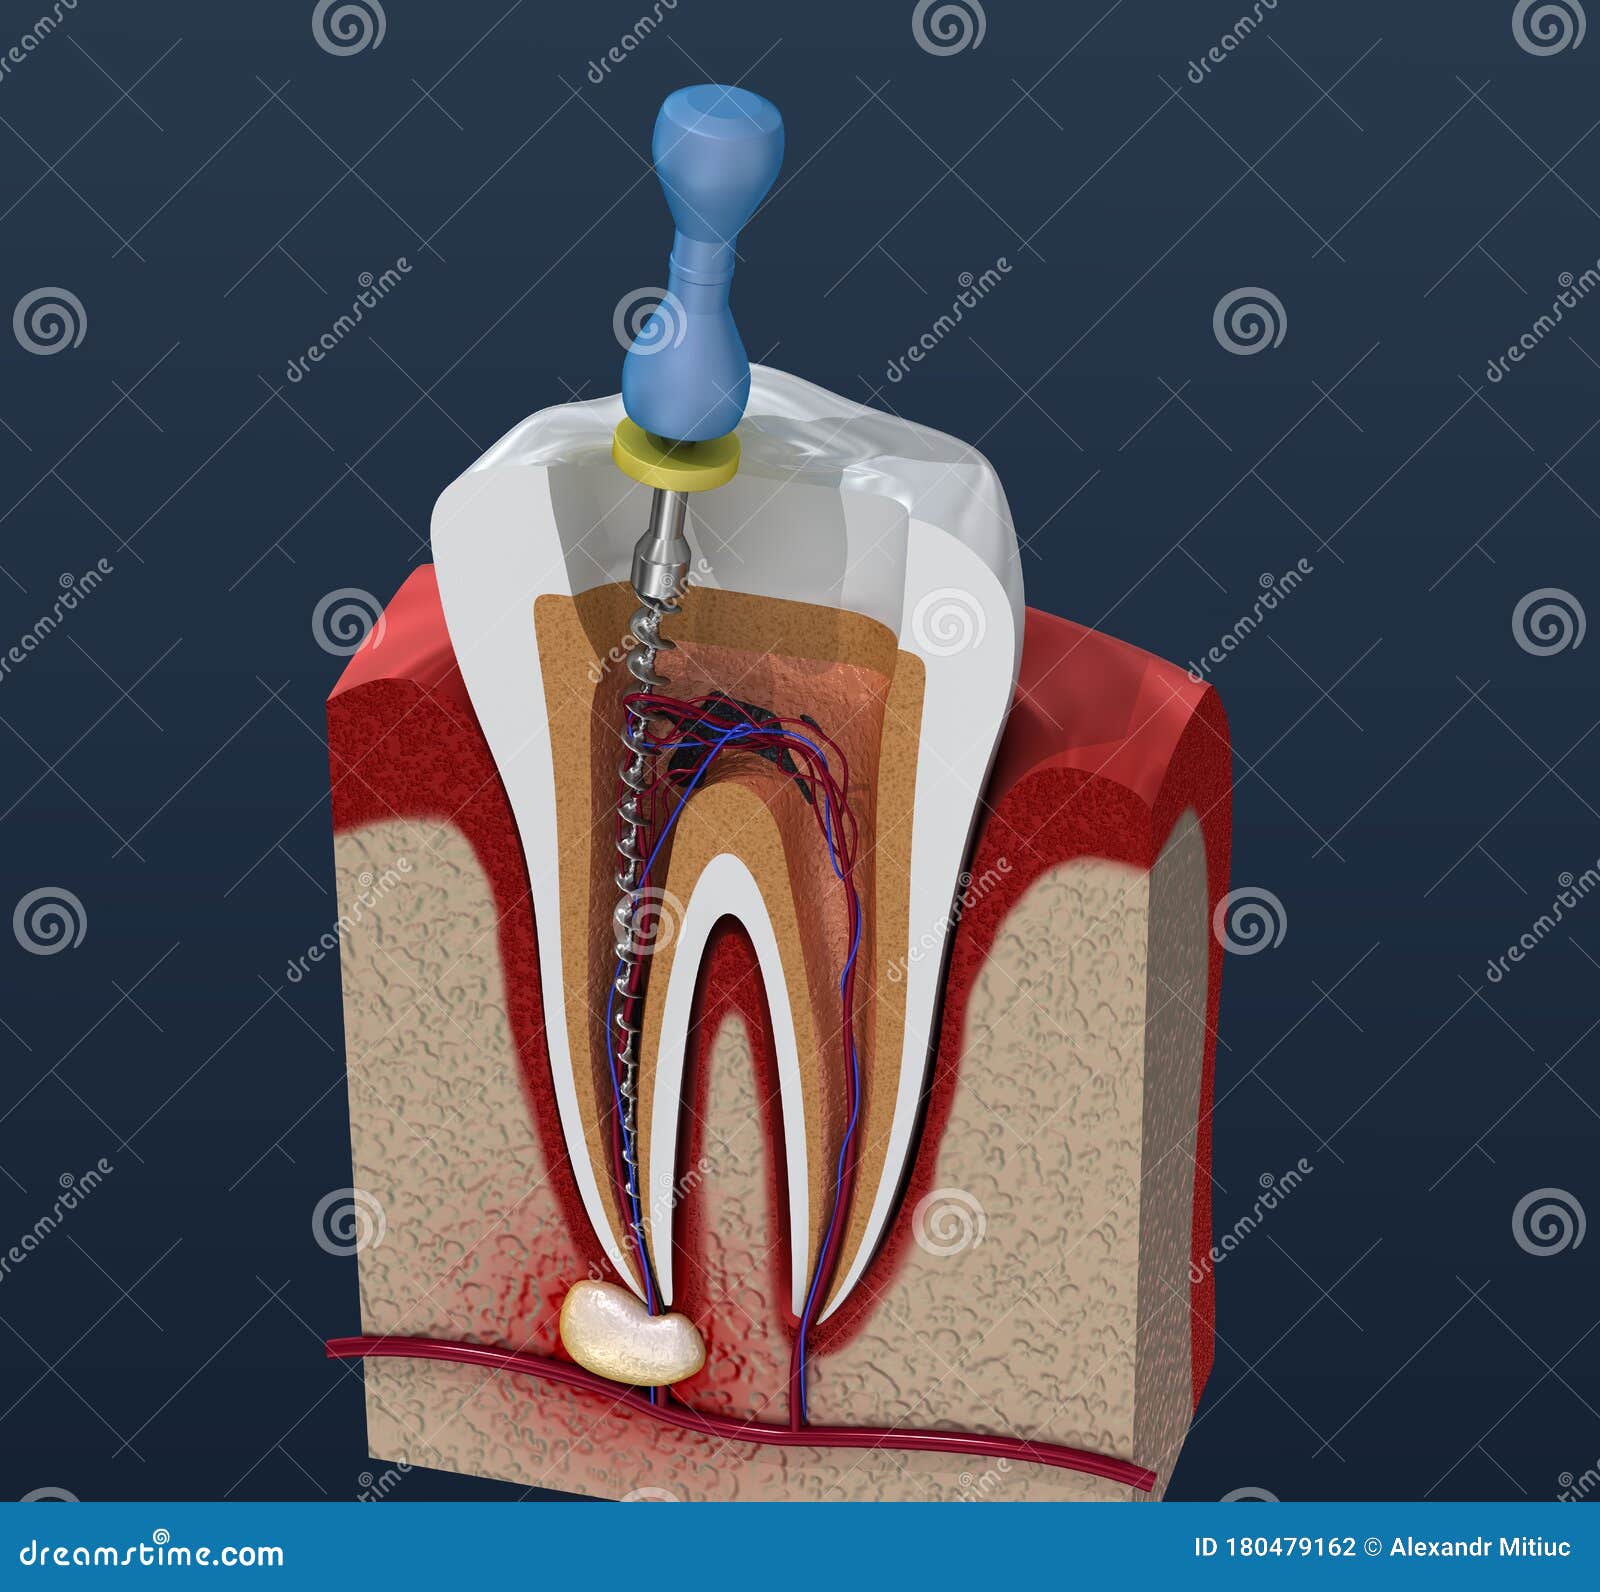 root canal treatment process. 